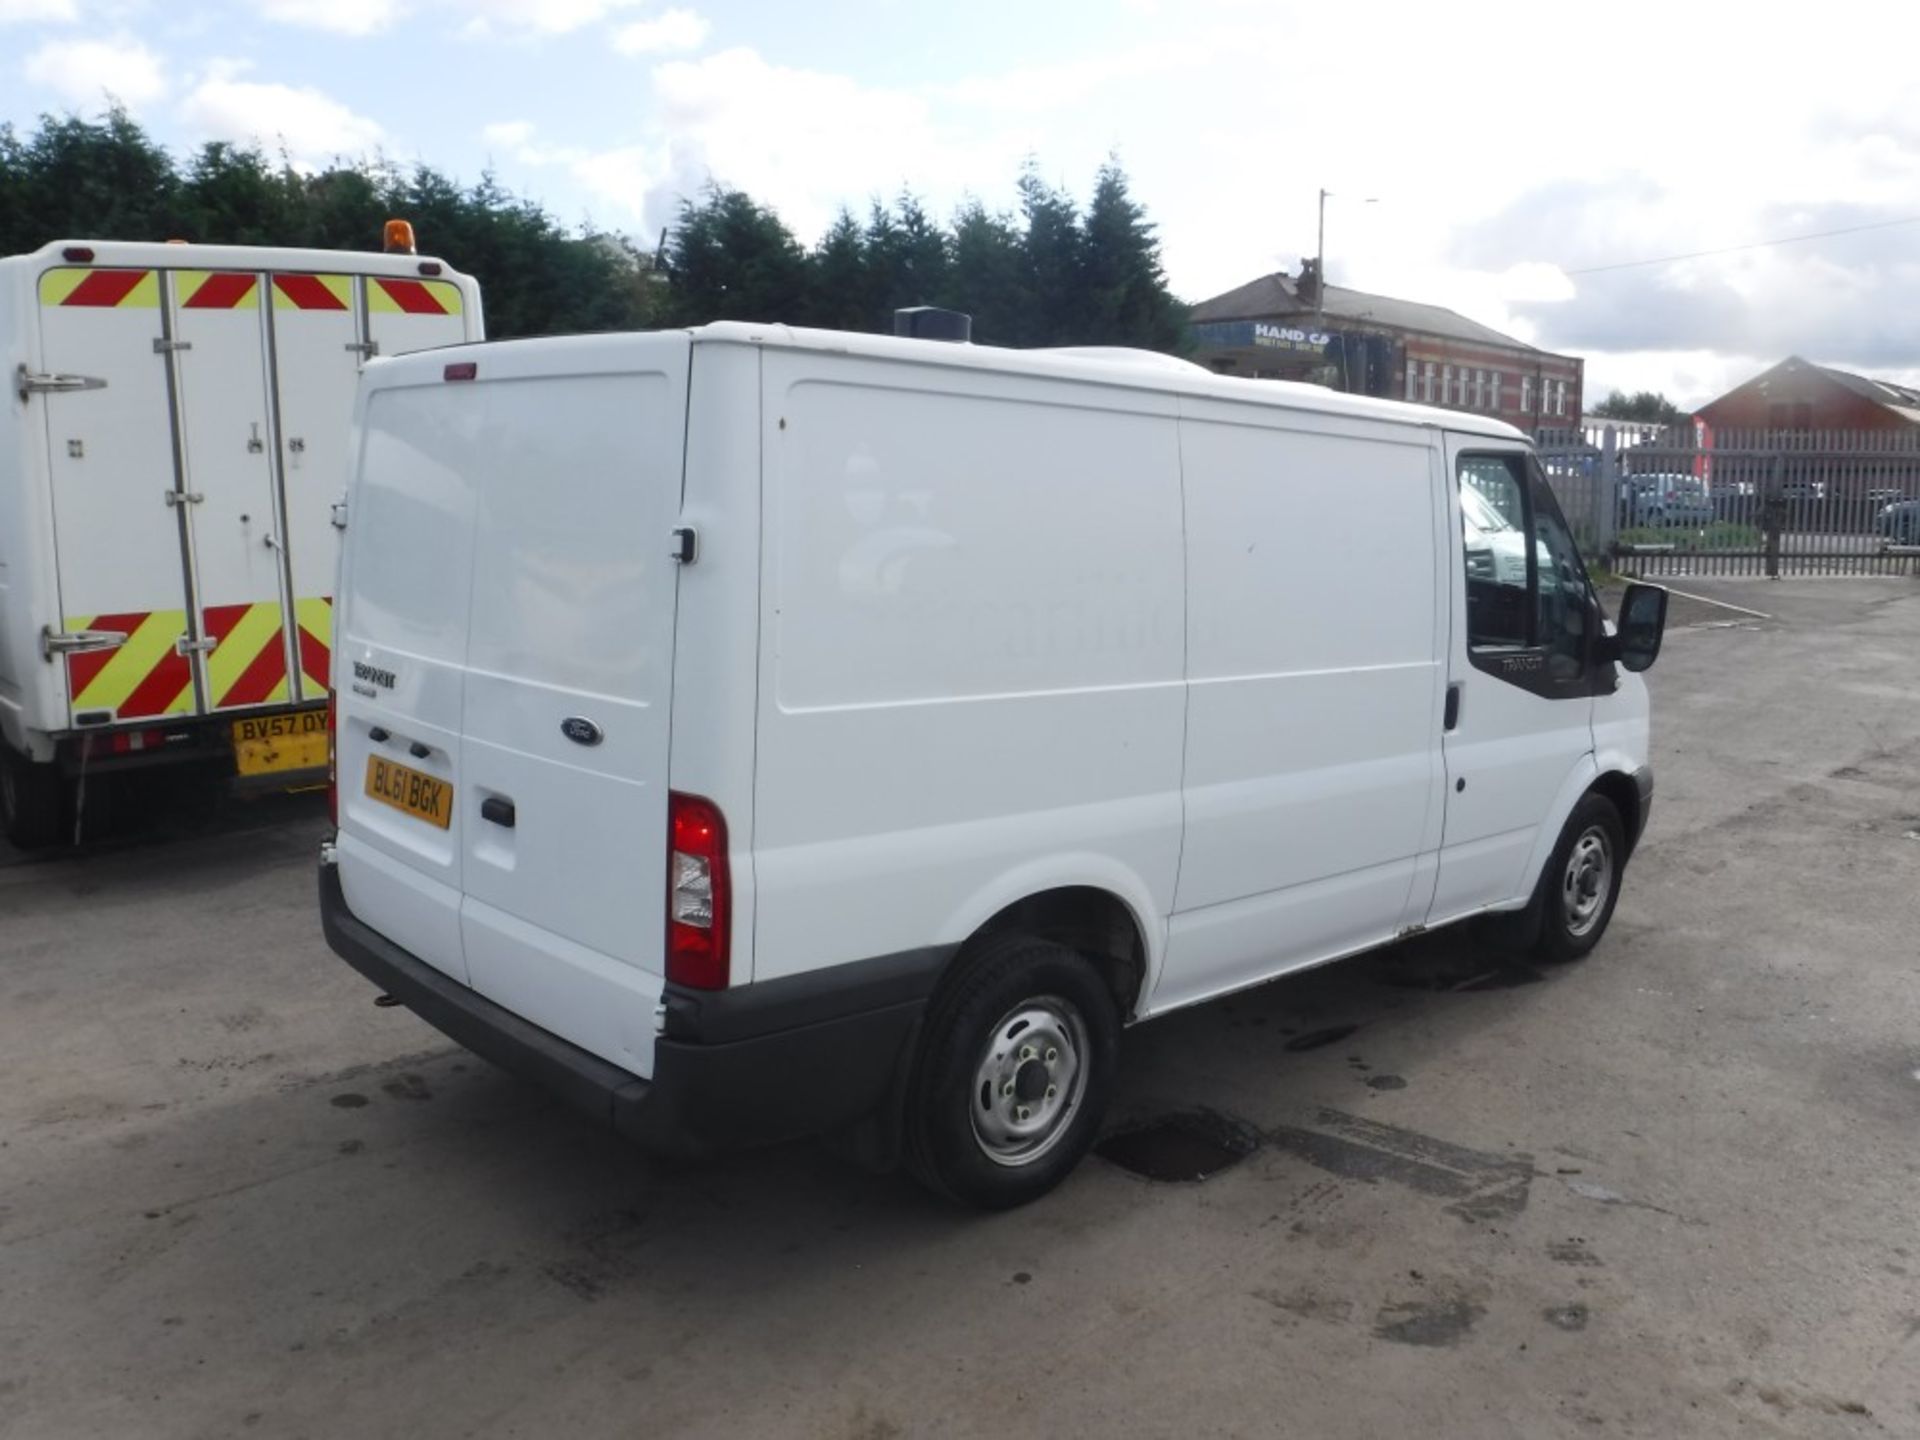 61 reg FORD TRANSIT 100 T280 FWD, 1ST REG 02/12, TEST 01/19, 120903M, V5 HERE, 1 OWNER FROM NEW [+ - Image 4 of 5